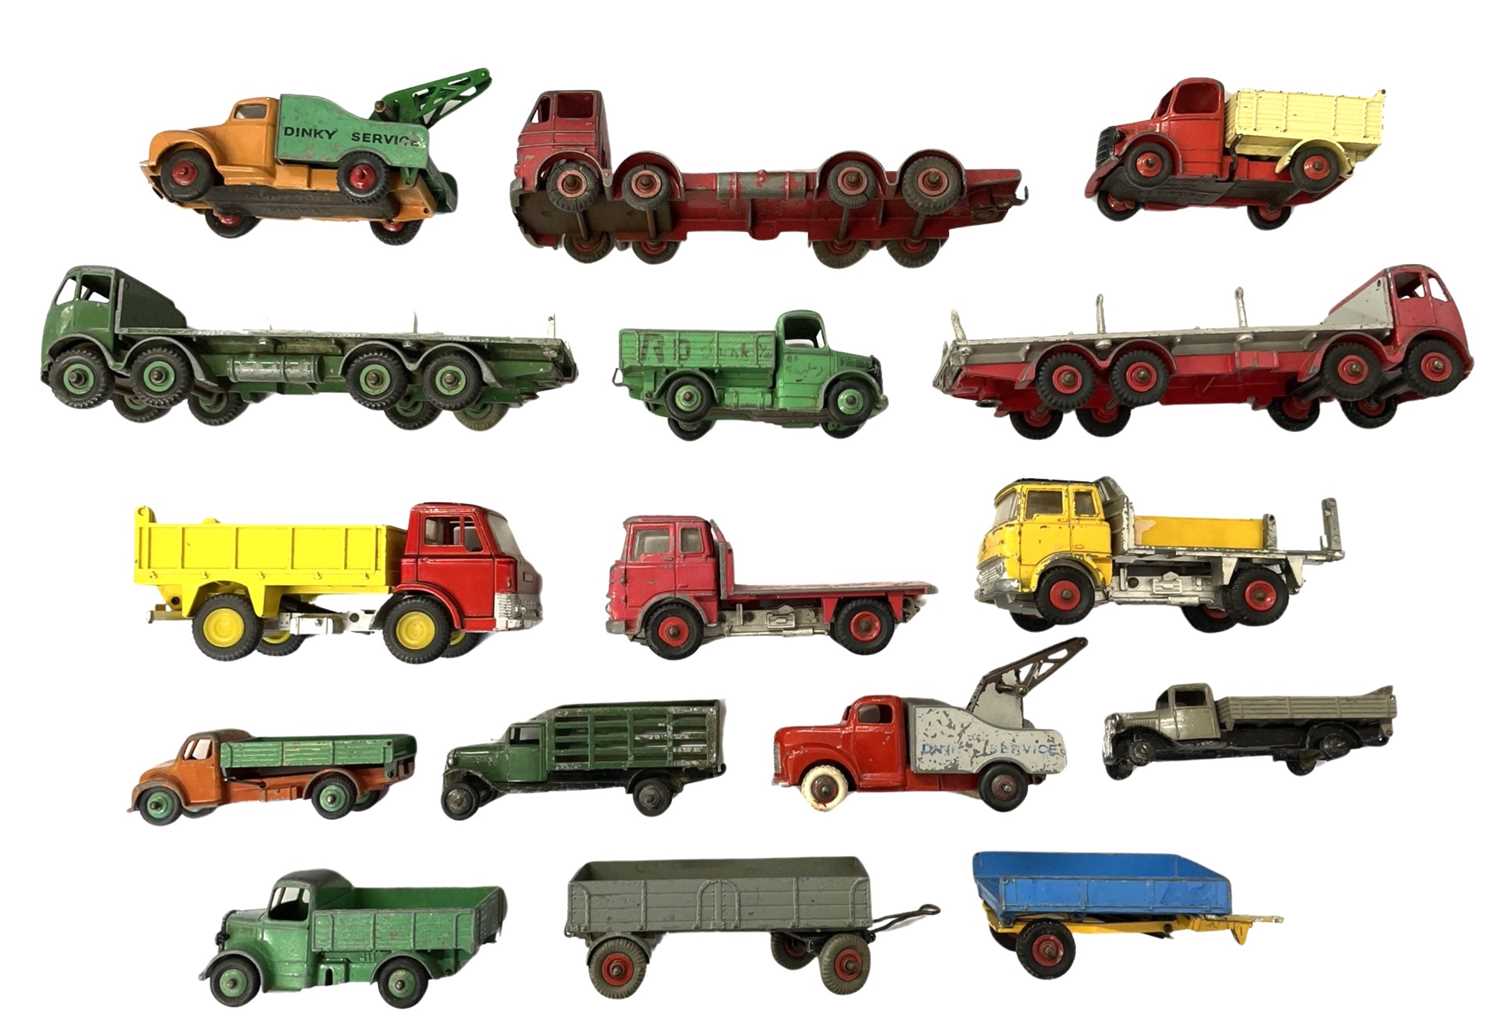 A collection of various die-cast Dinky flatbed trucks